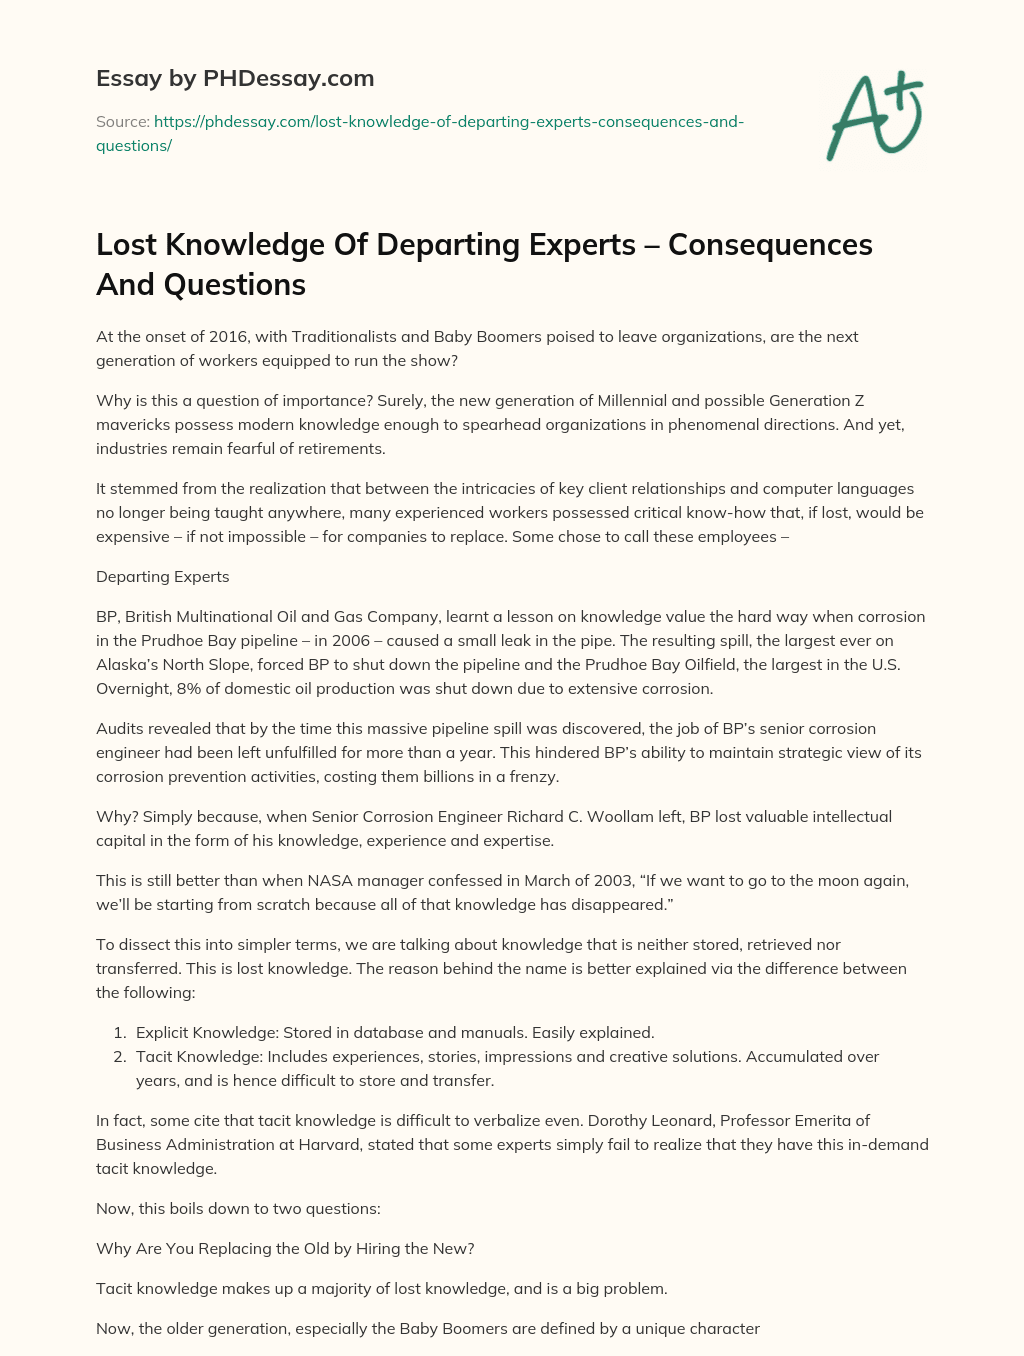 Lost Knowledge Of Departing Experts – Consequences And Questions essay